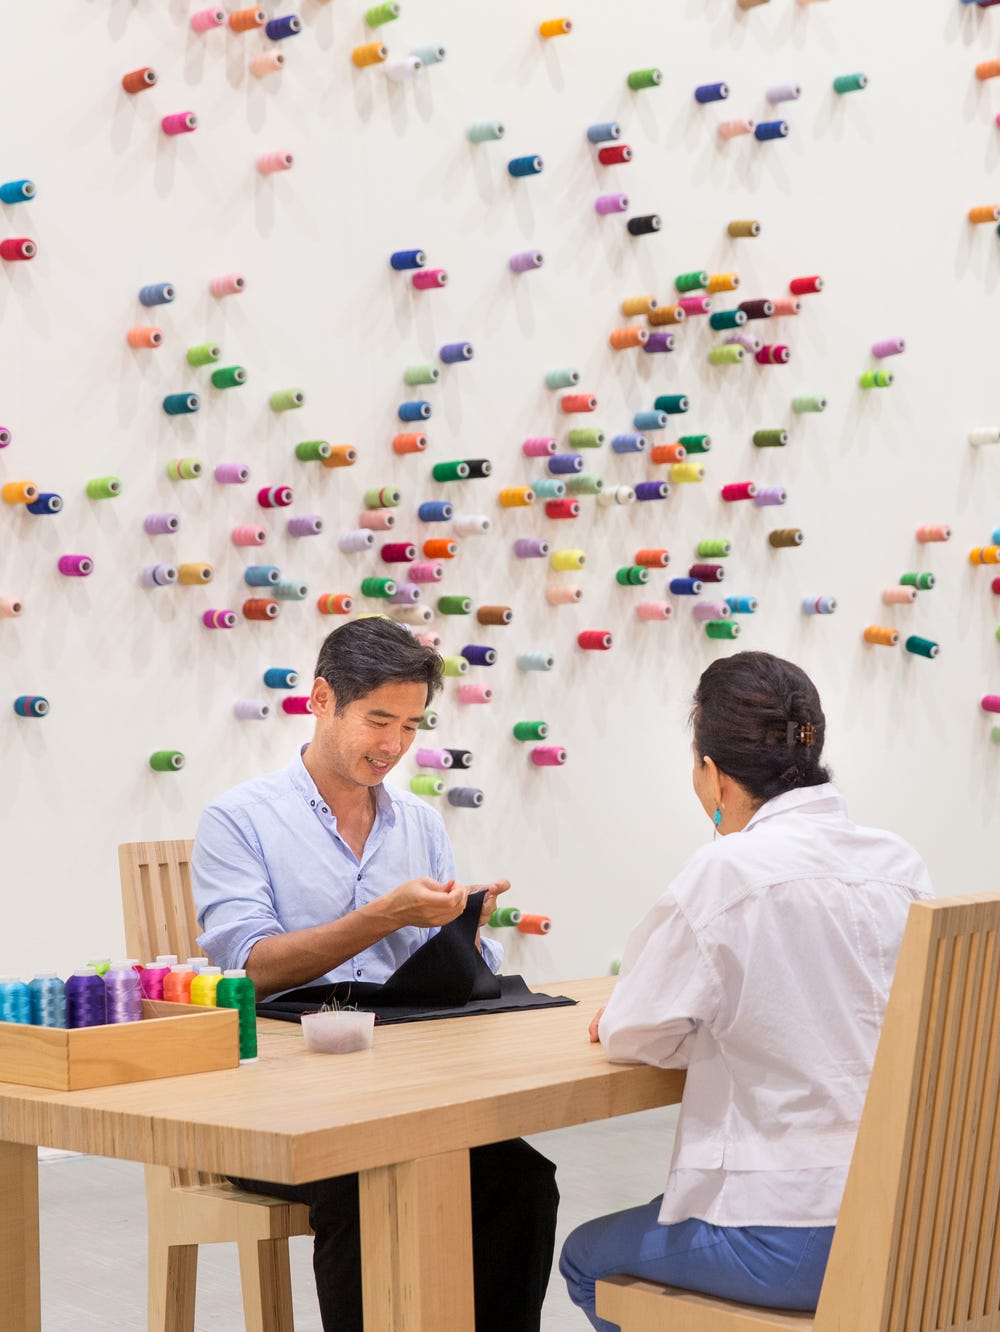 People mending cloth at a table in front of a wall covered in spools of thread